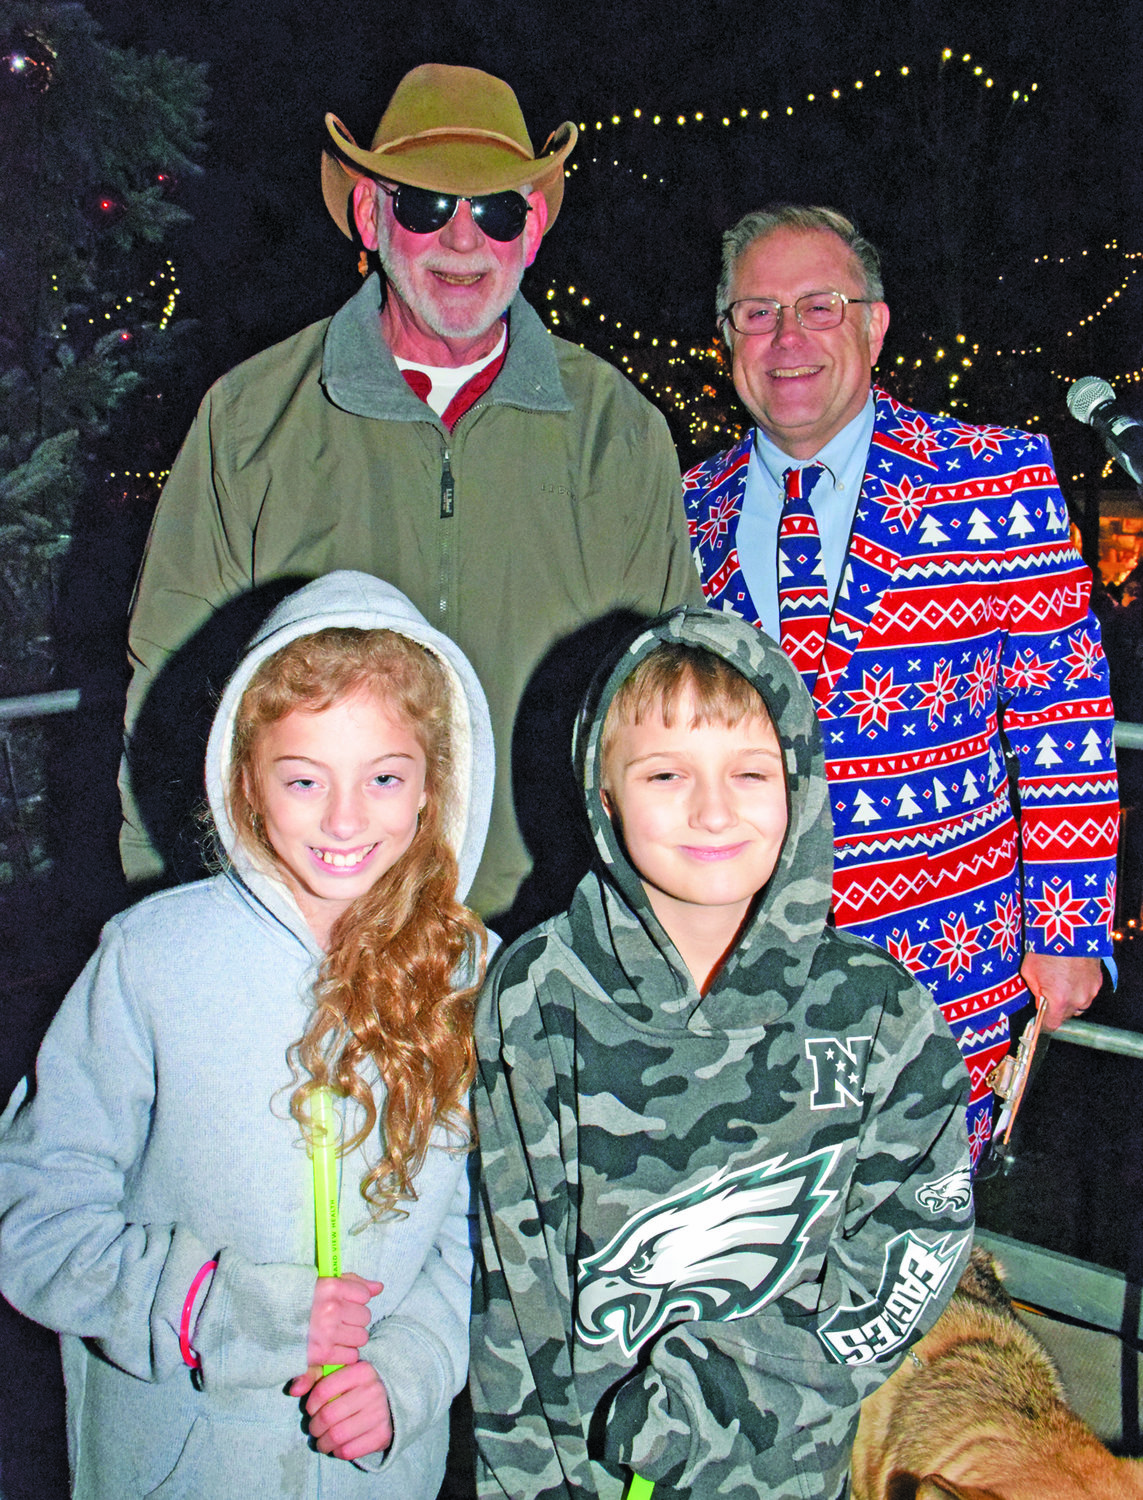 Perkasie Mayor John Hollenbach, Todd Hurley, executive vice president, chief relationship officer, Penn Community Bank, and Liam Nicolosi, 9, who won the chance to light the tree with Santa. He was assisted by his cousin Maria Ciuchta, 10.